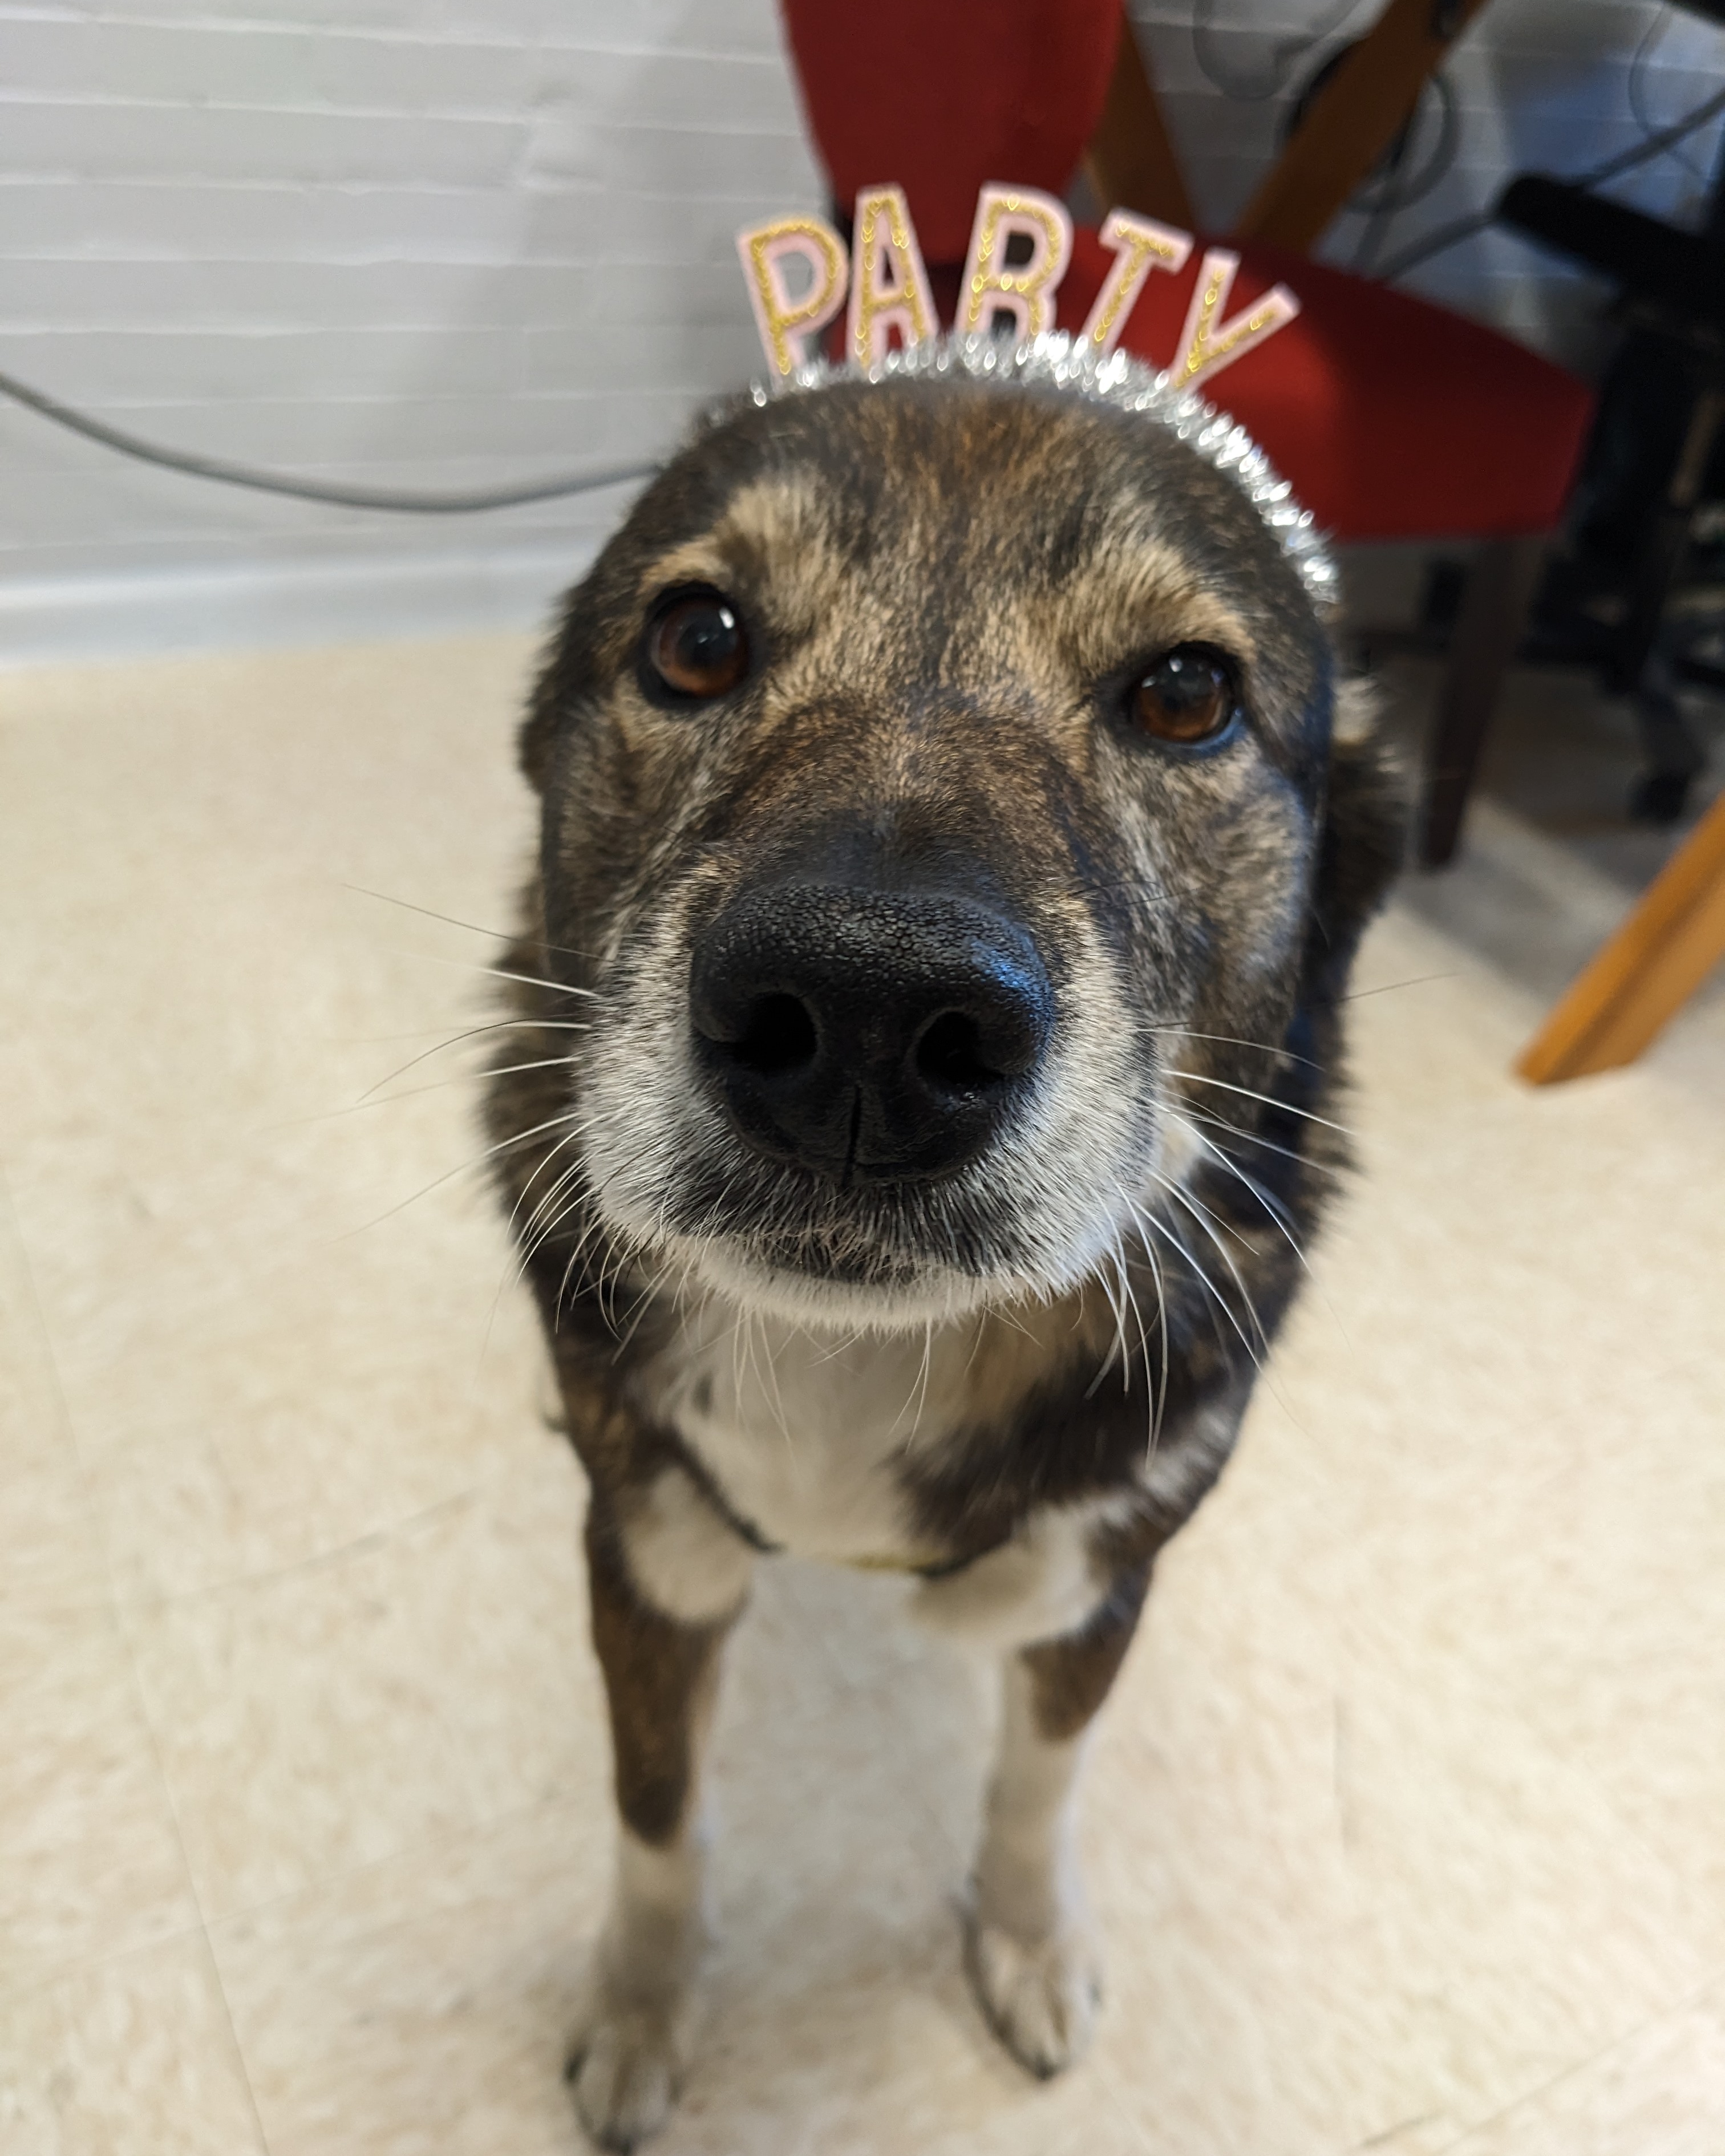 A dog wearing a headband that reads "Party"